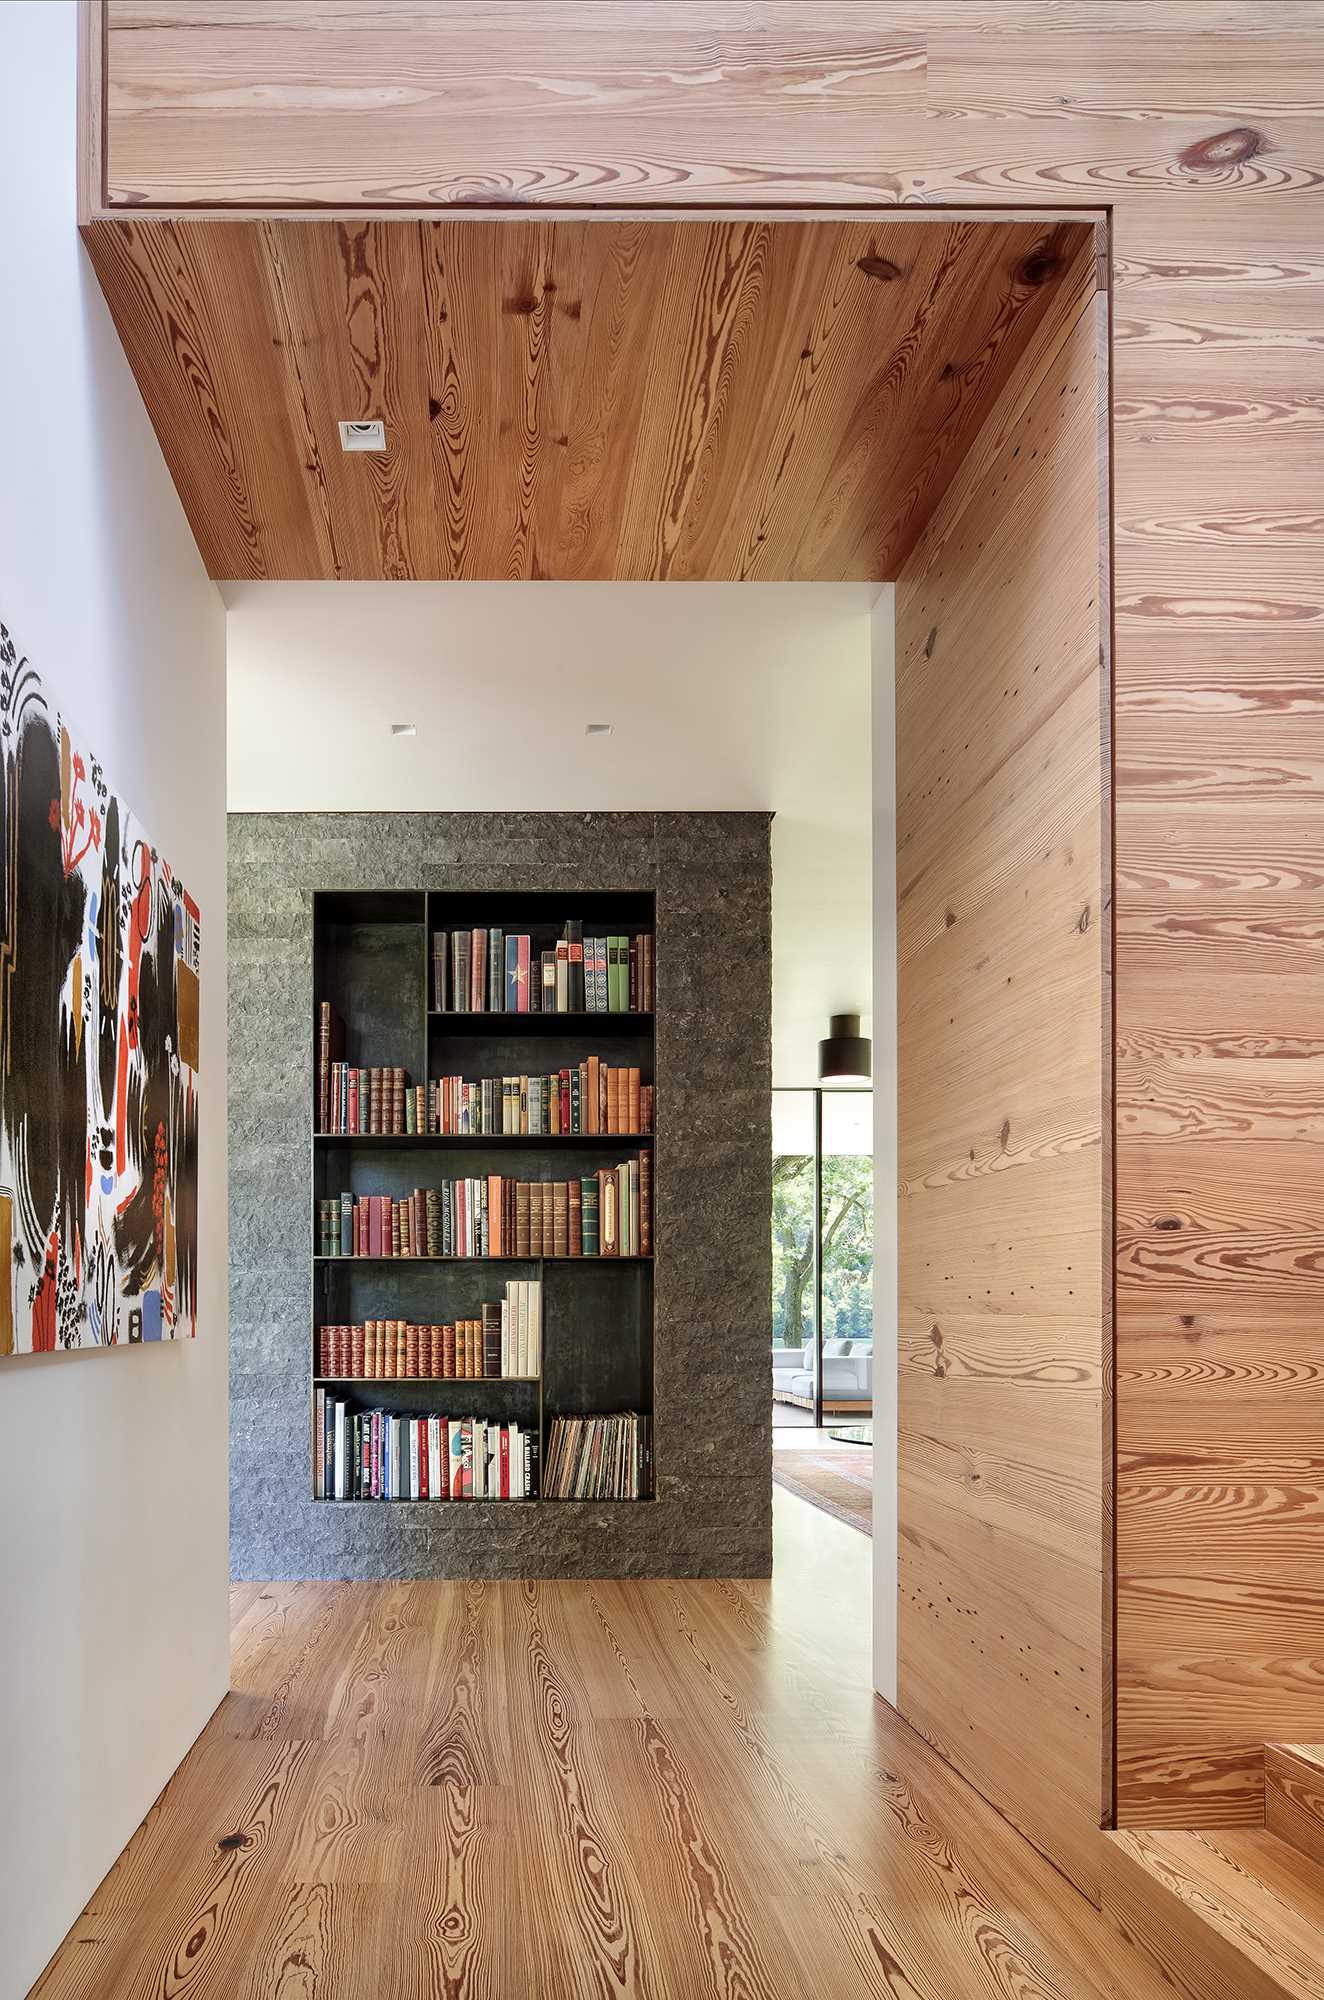 Steel bookshelves are nestled into both sides of the limestone fireplace surround, while wood stairs connect to the bedrooms and bathrooms.